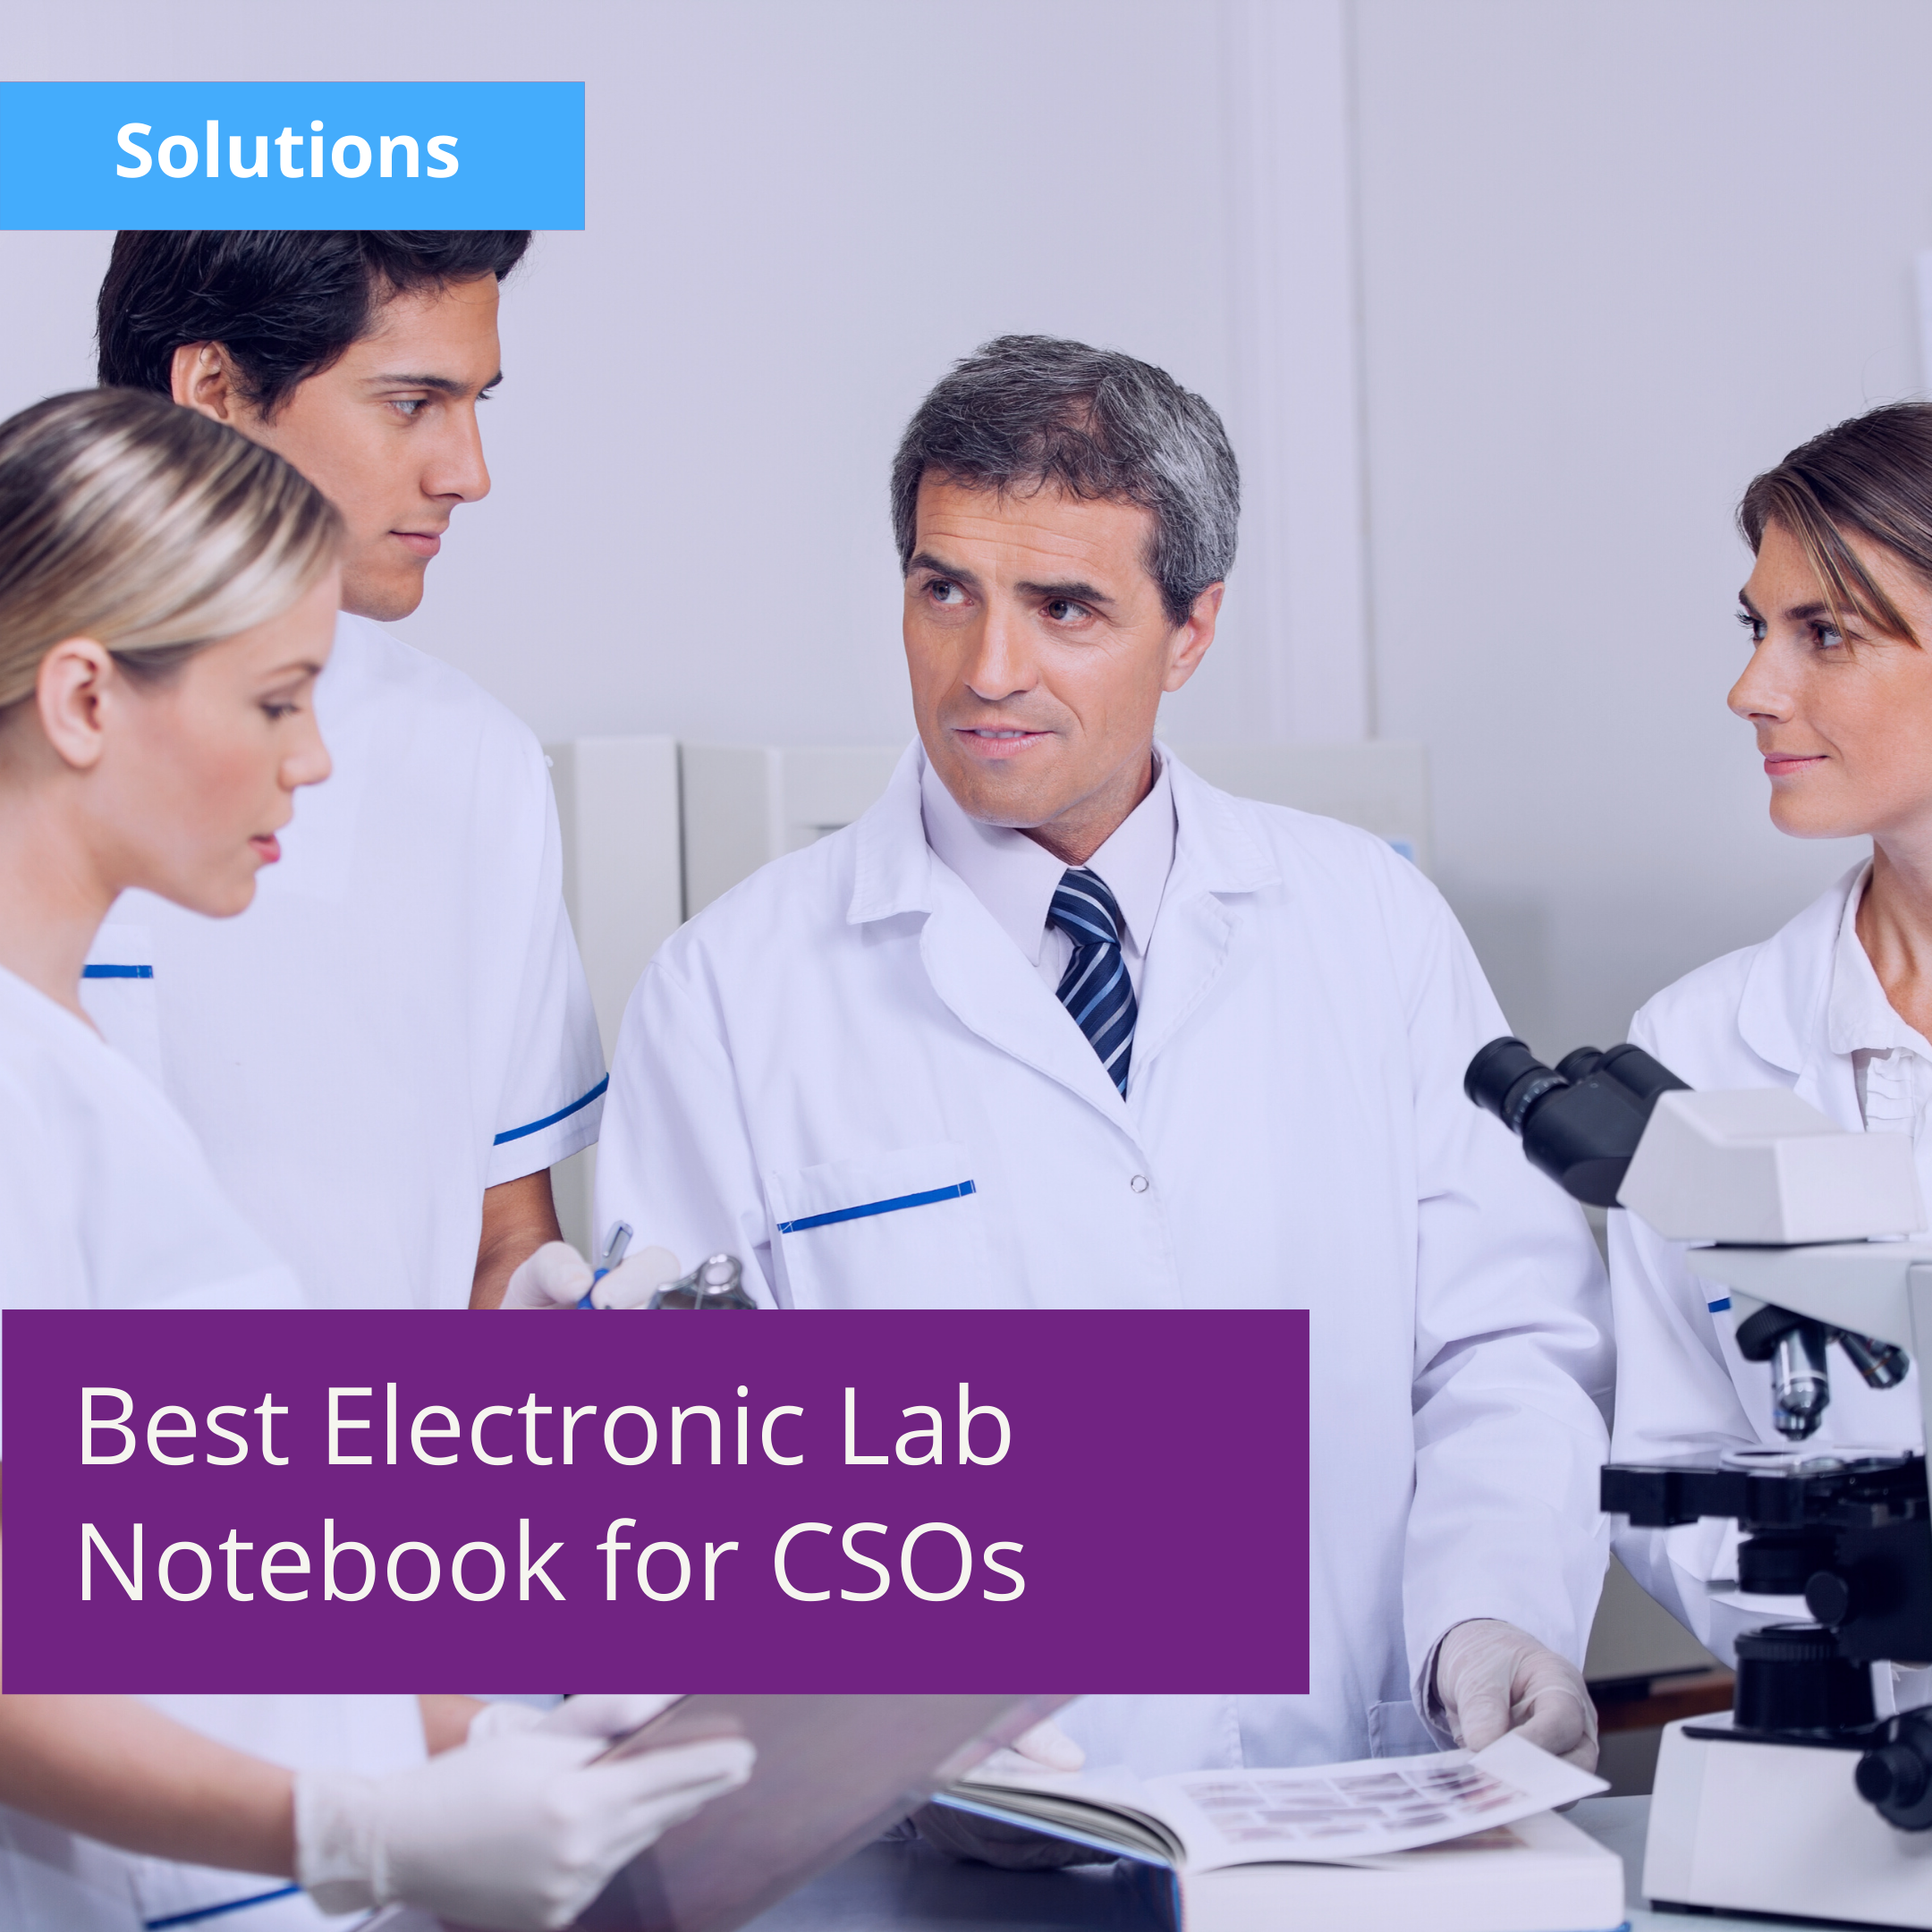 Electronic lab notebook for CSOs